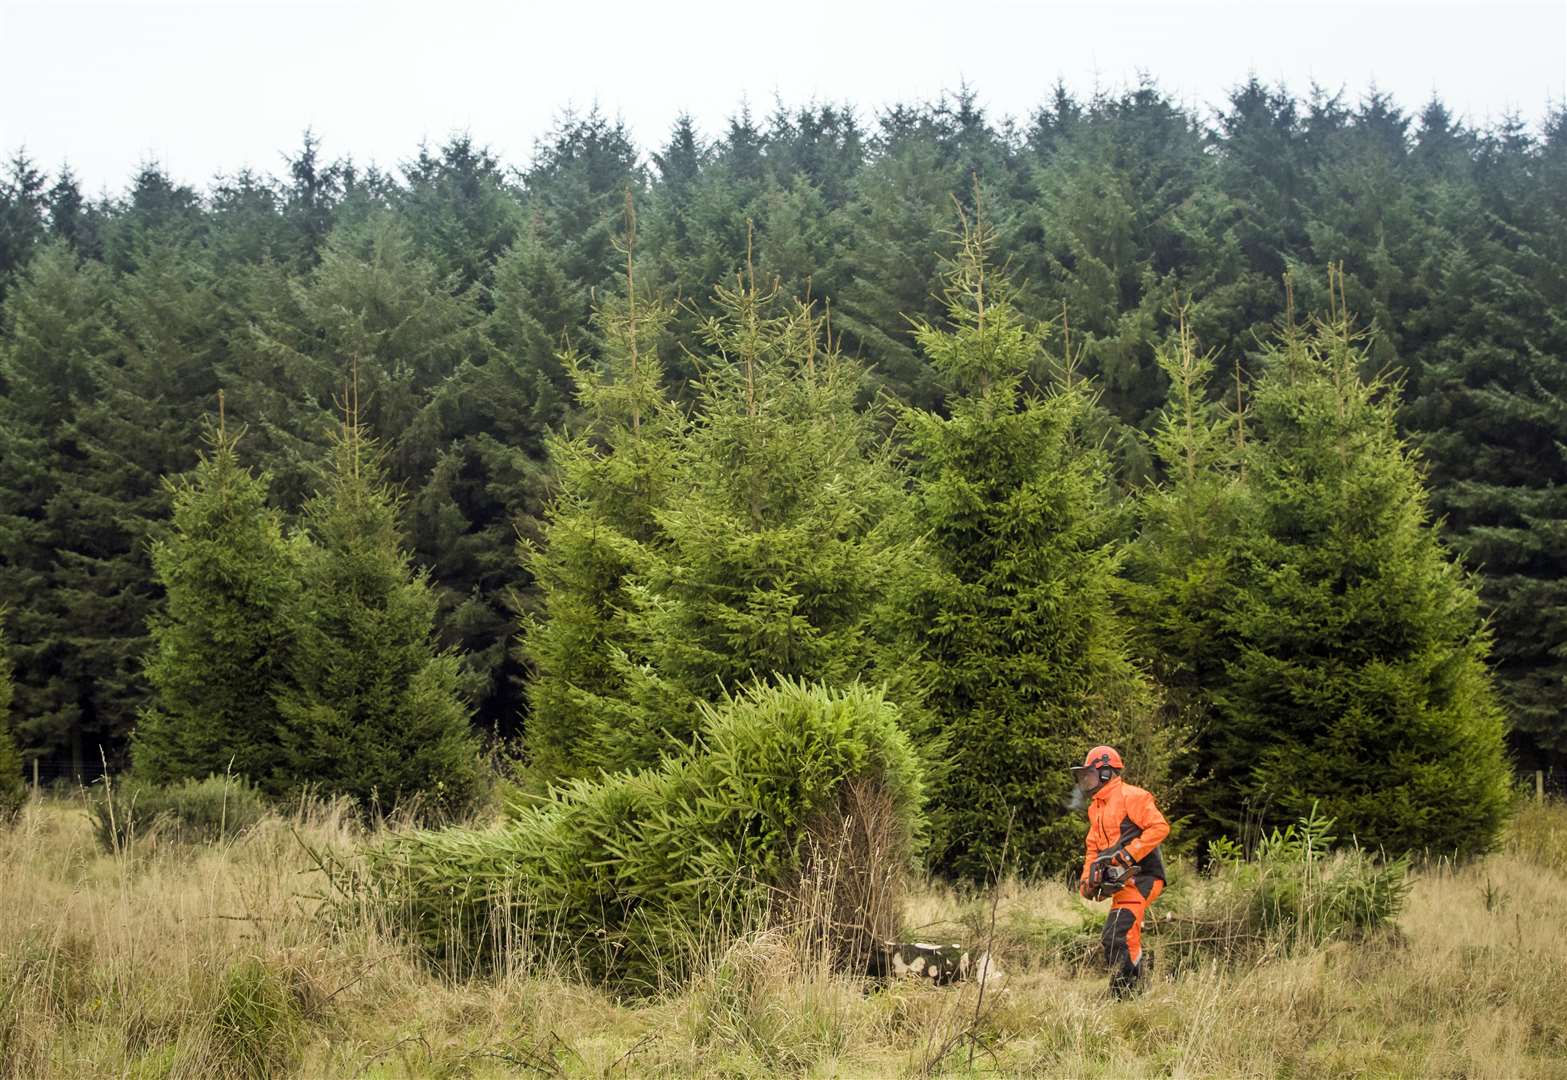 A Forestry Commission employee fells a sustainably grown Christmas tree in the Dalby forest, part of the North York Moors National Park (Danny Lawson/PA)